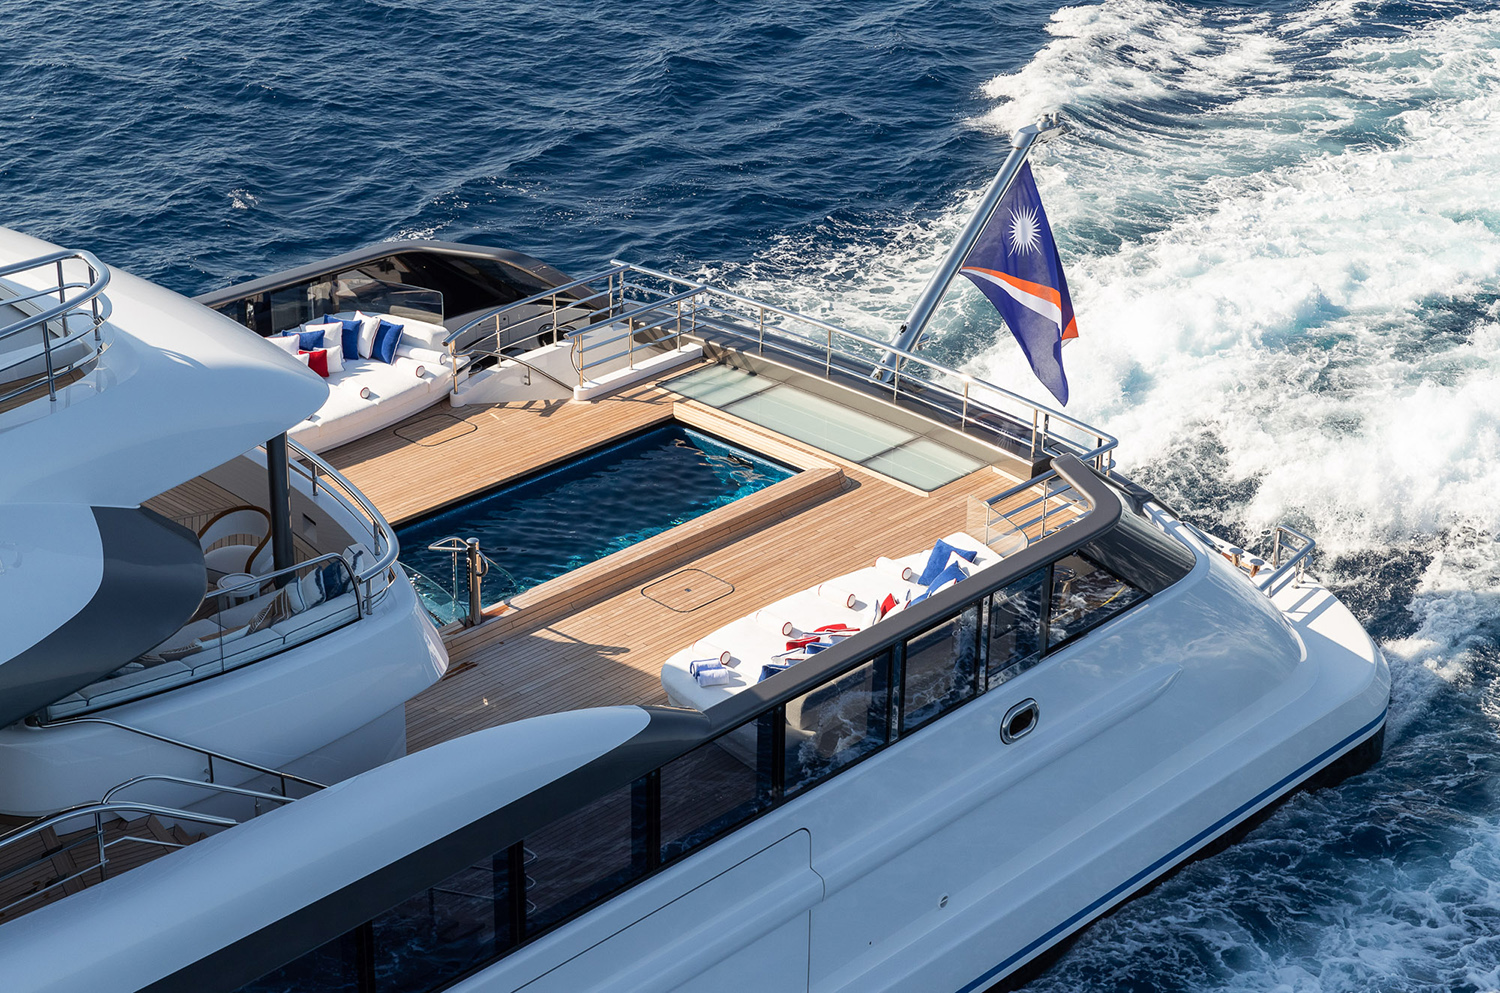 CC-Summer delivers on all things stunning yacht charter